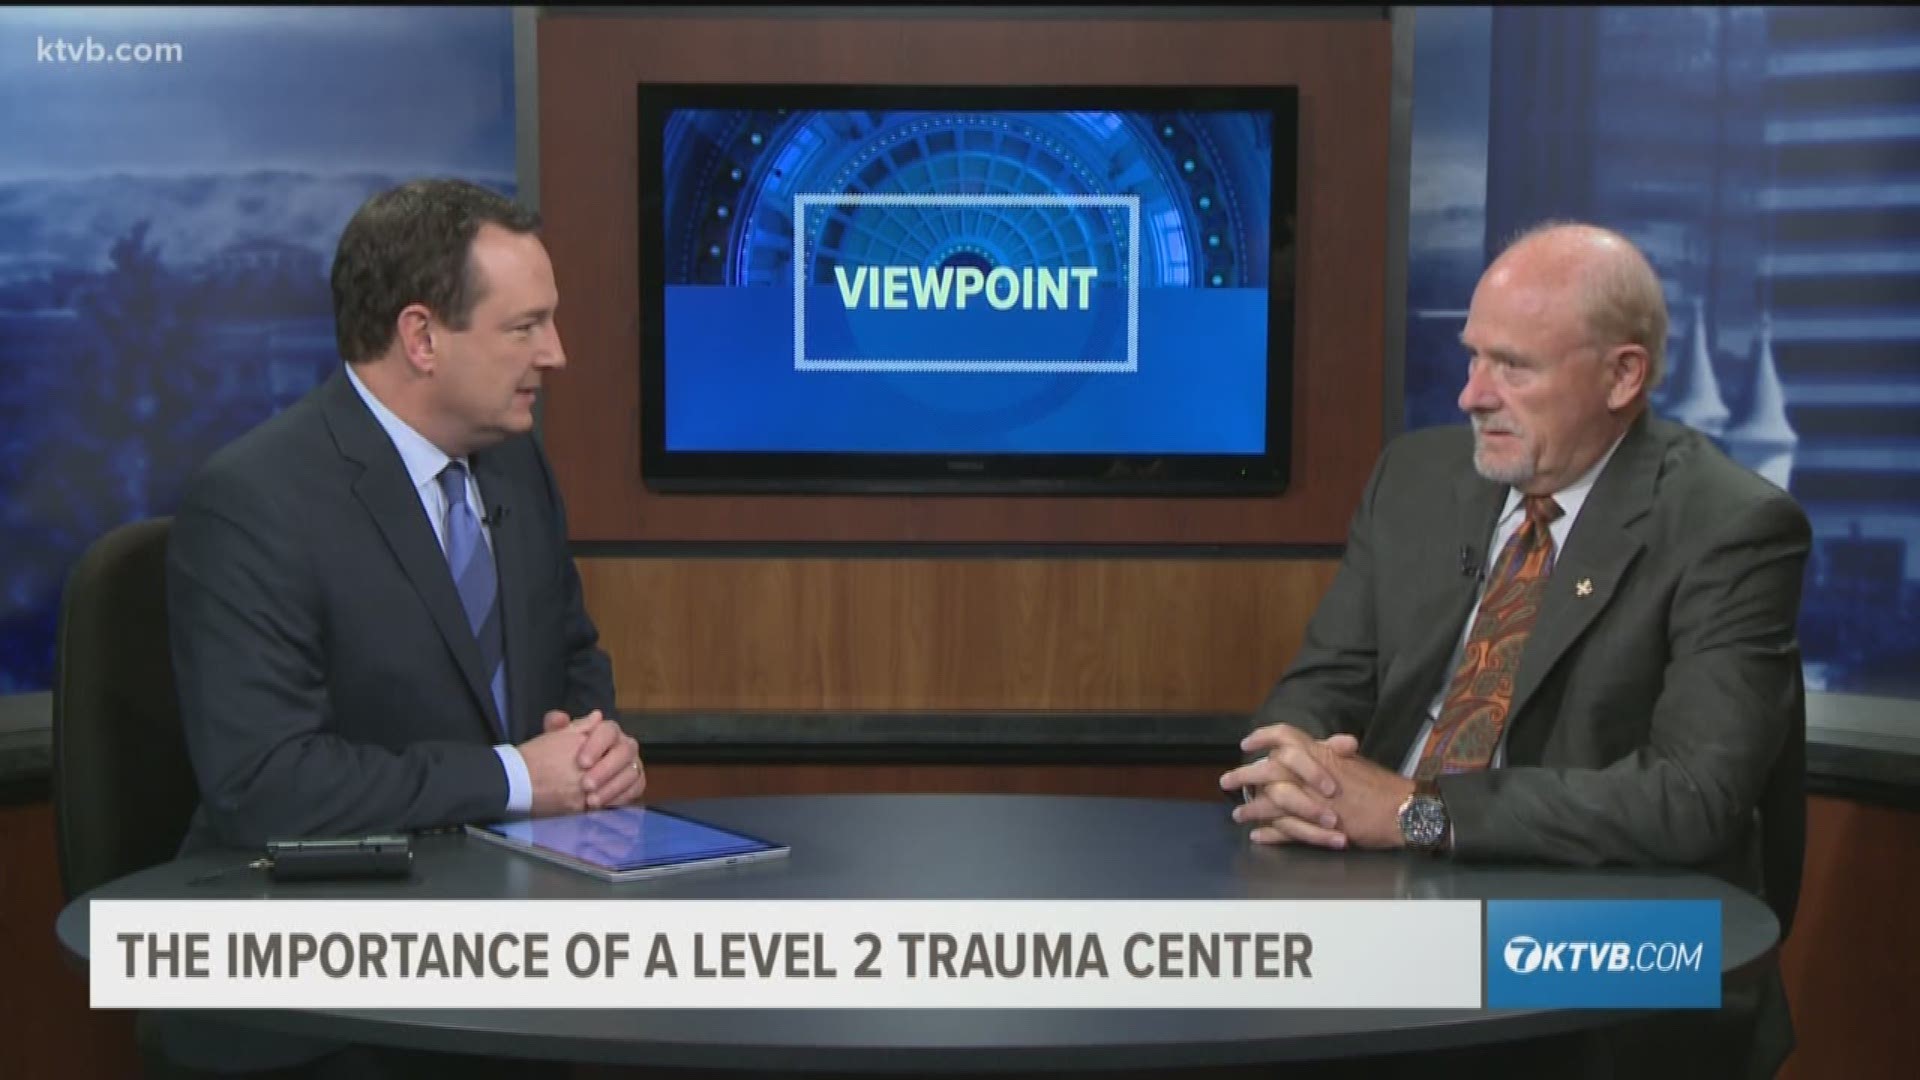 Saint Alphonsus Regional Medical Center is the only Level II Trauma Center in Southwest Idaho. On Viewpoint, Saint Al's Trauma Medical Director Dr. Bill Morgan explains why it's important for the people of this area to have this level of a trauma center n